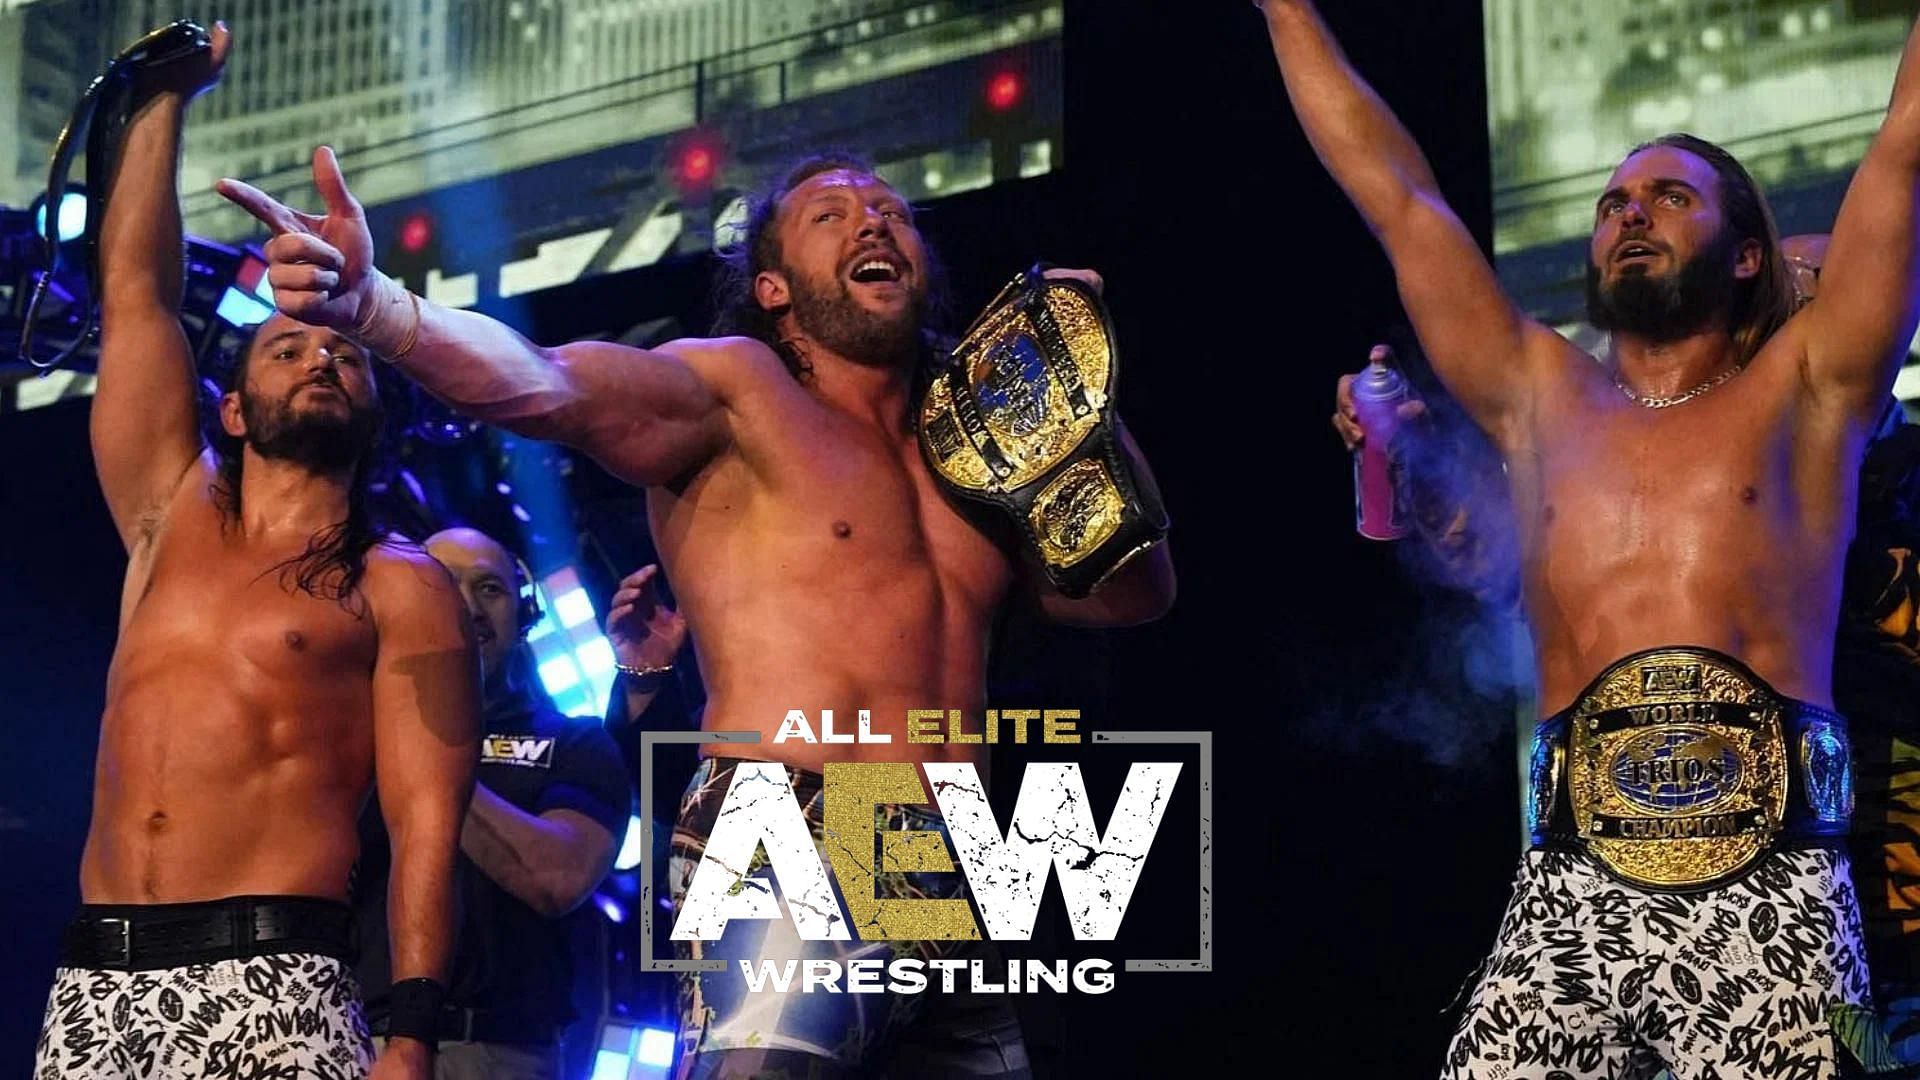 The Elite were stripped of the AEW Trios Championship